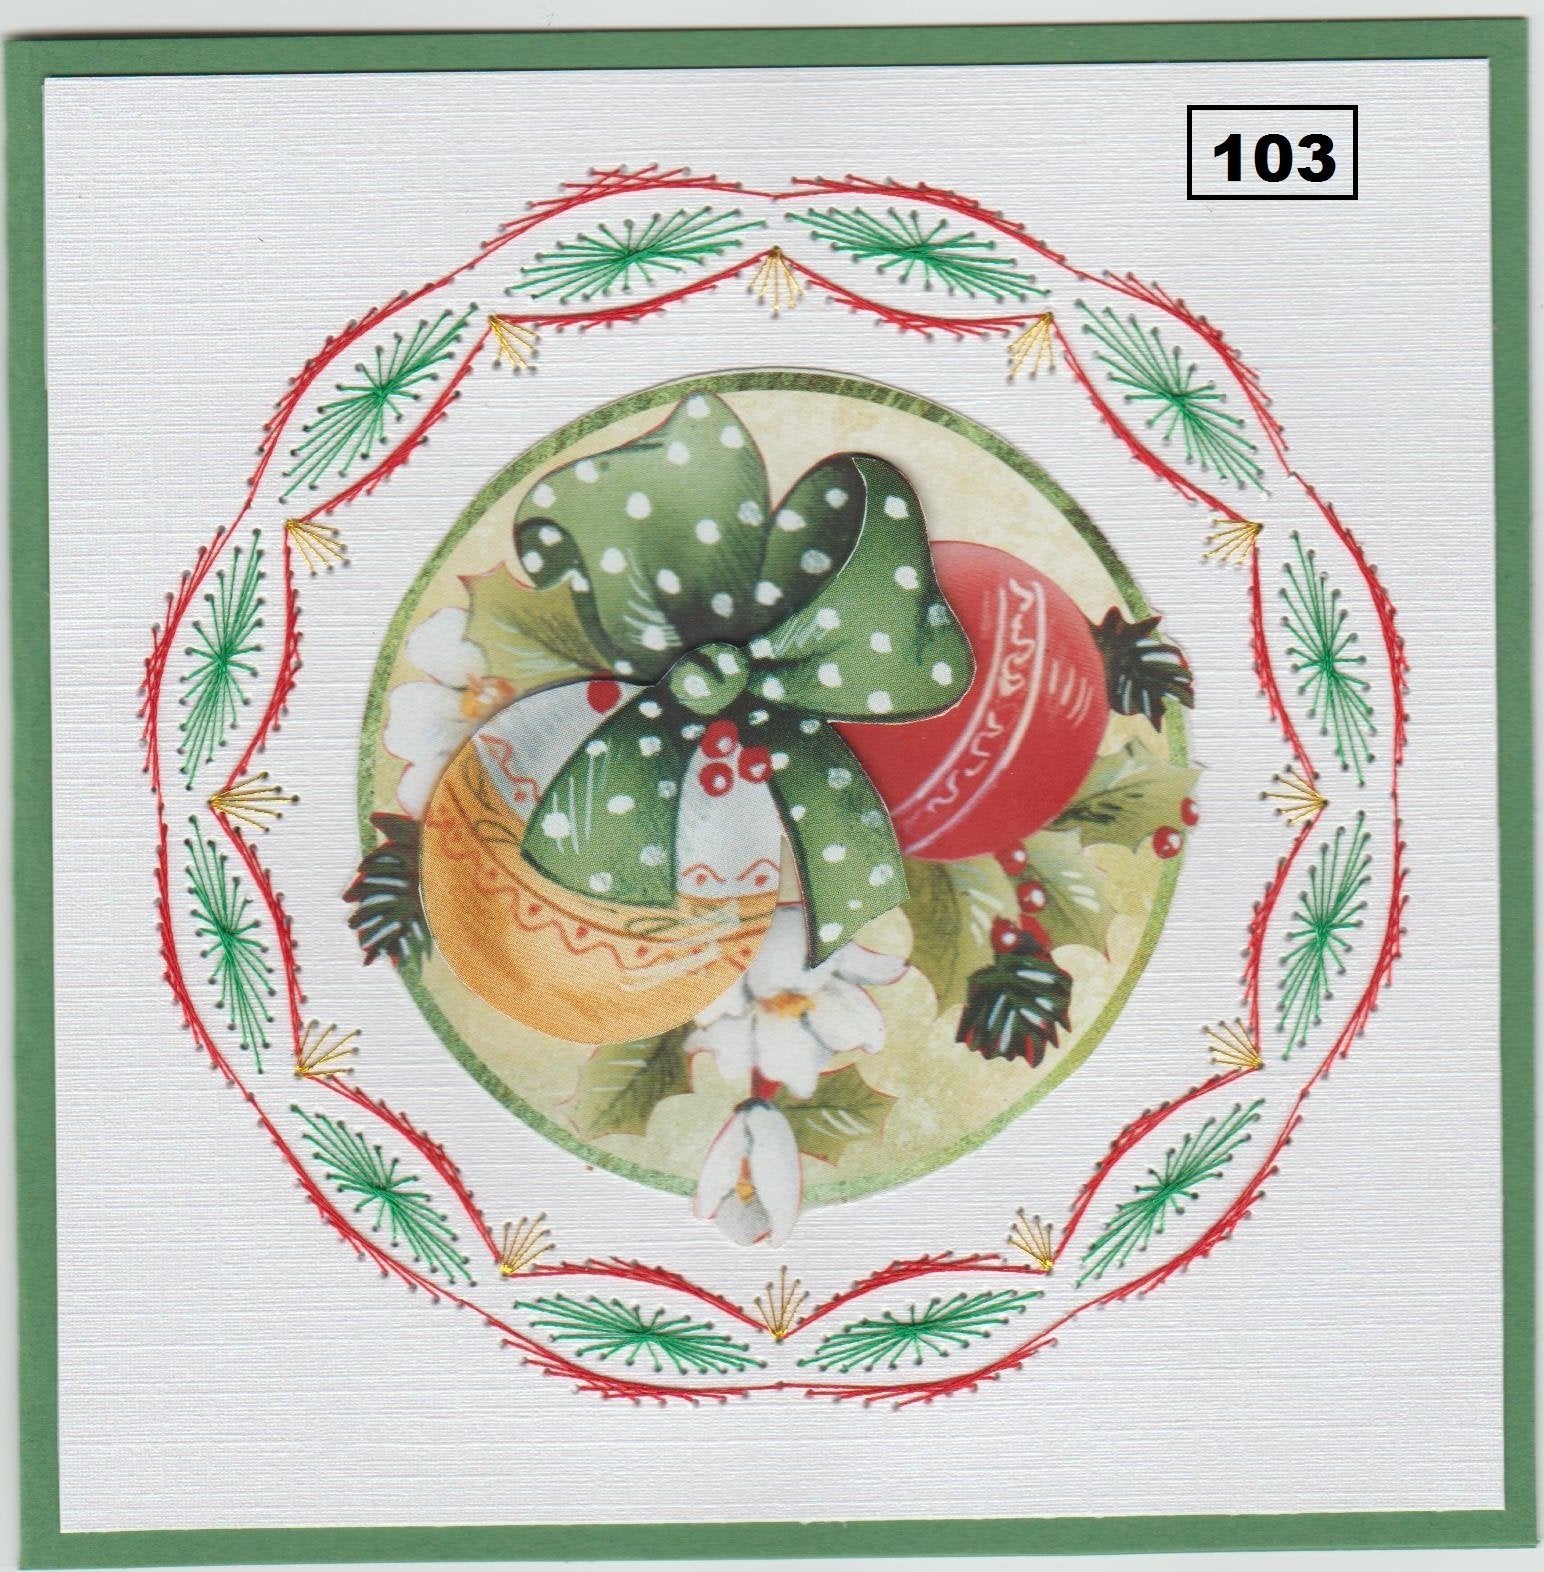 Laura's Design Digital Embroidery Pattern - Smooth Wreath